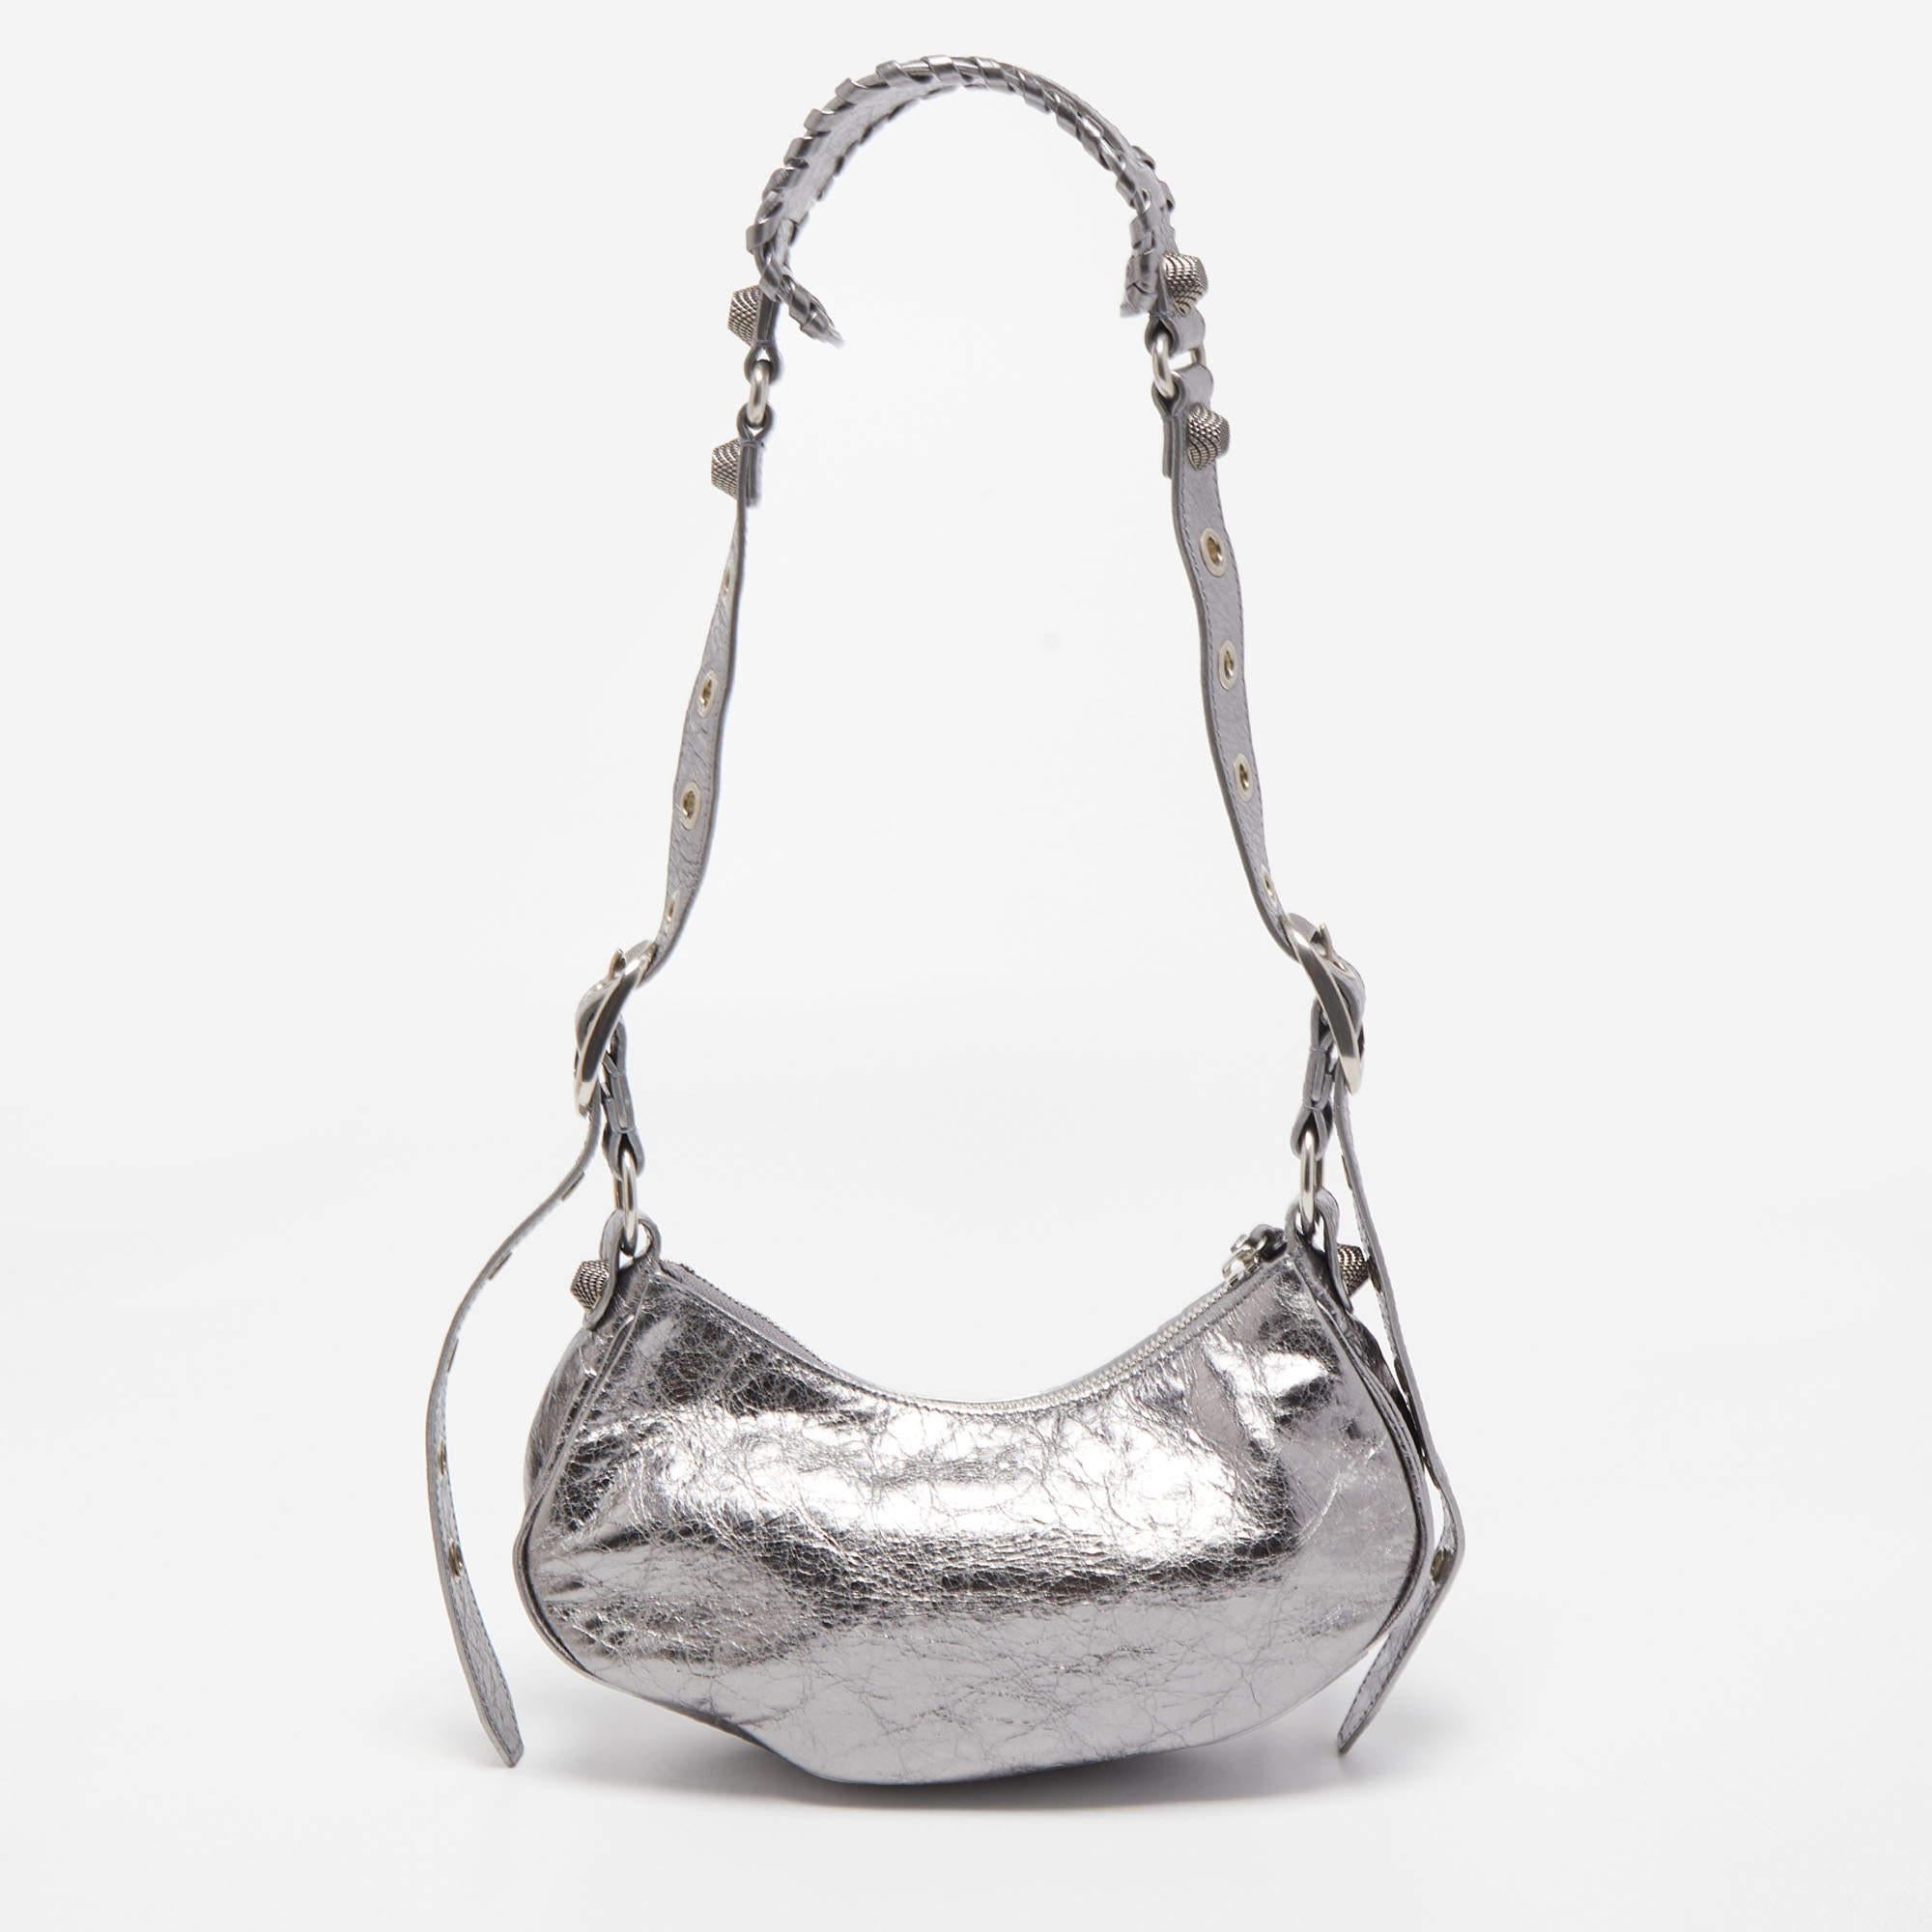 Ensure your day's essentials are in order and your outfit is complete with this Balenciaga XS Le Cagole shoulder bag. Crafted using leather, the bag has a single handle, silver-tone metal accents, and a fabric-lined interior.

Includes: Pocket